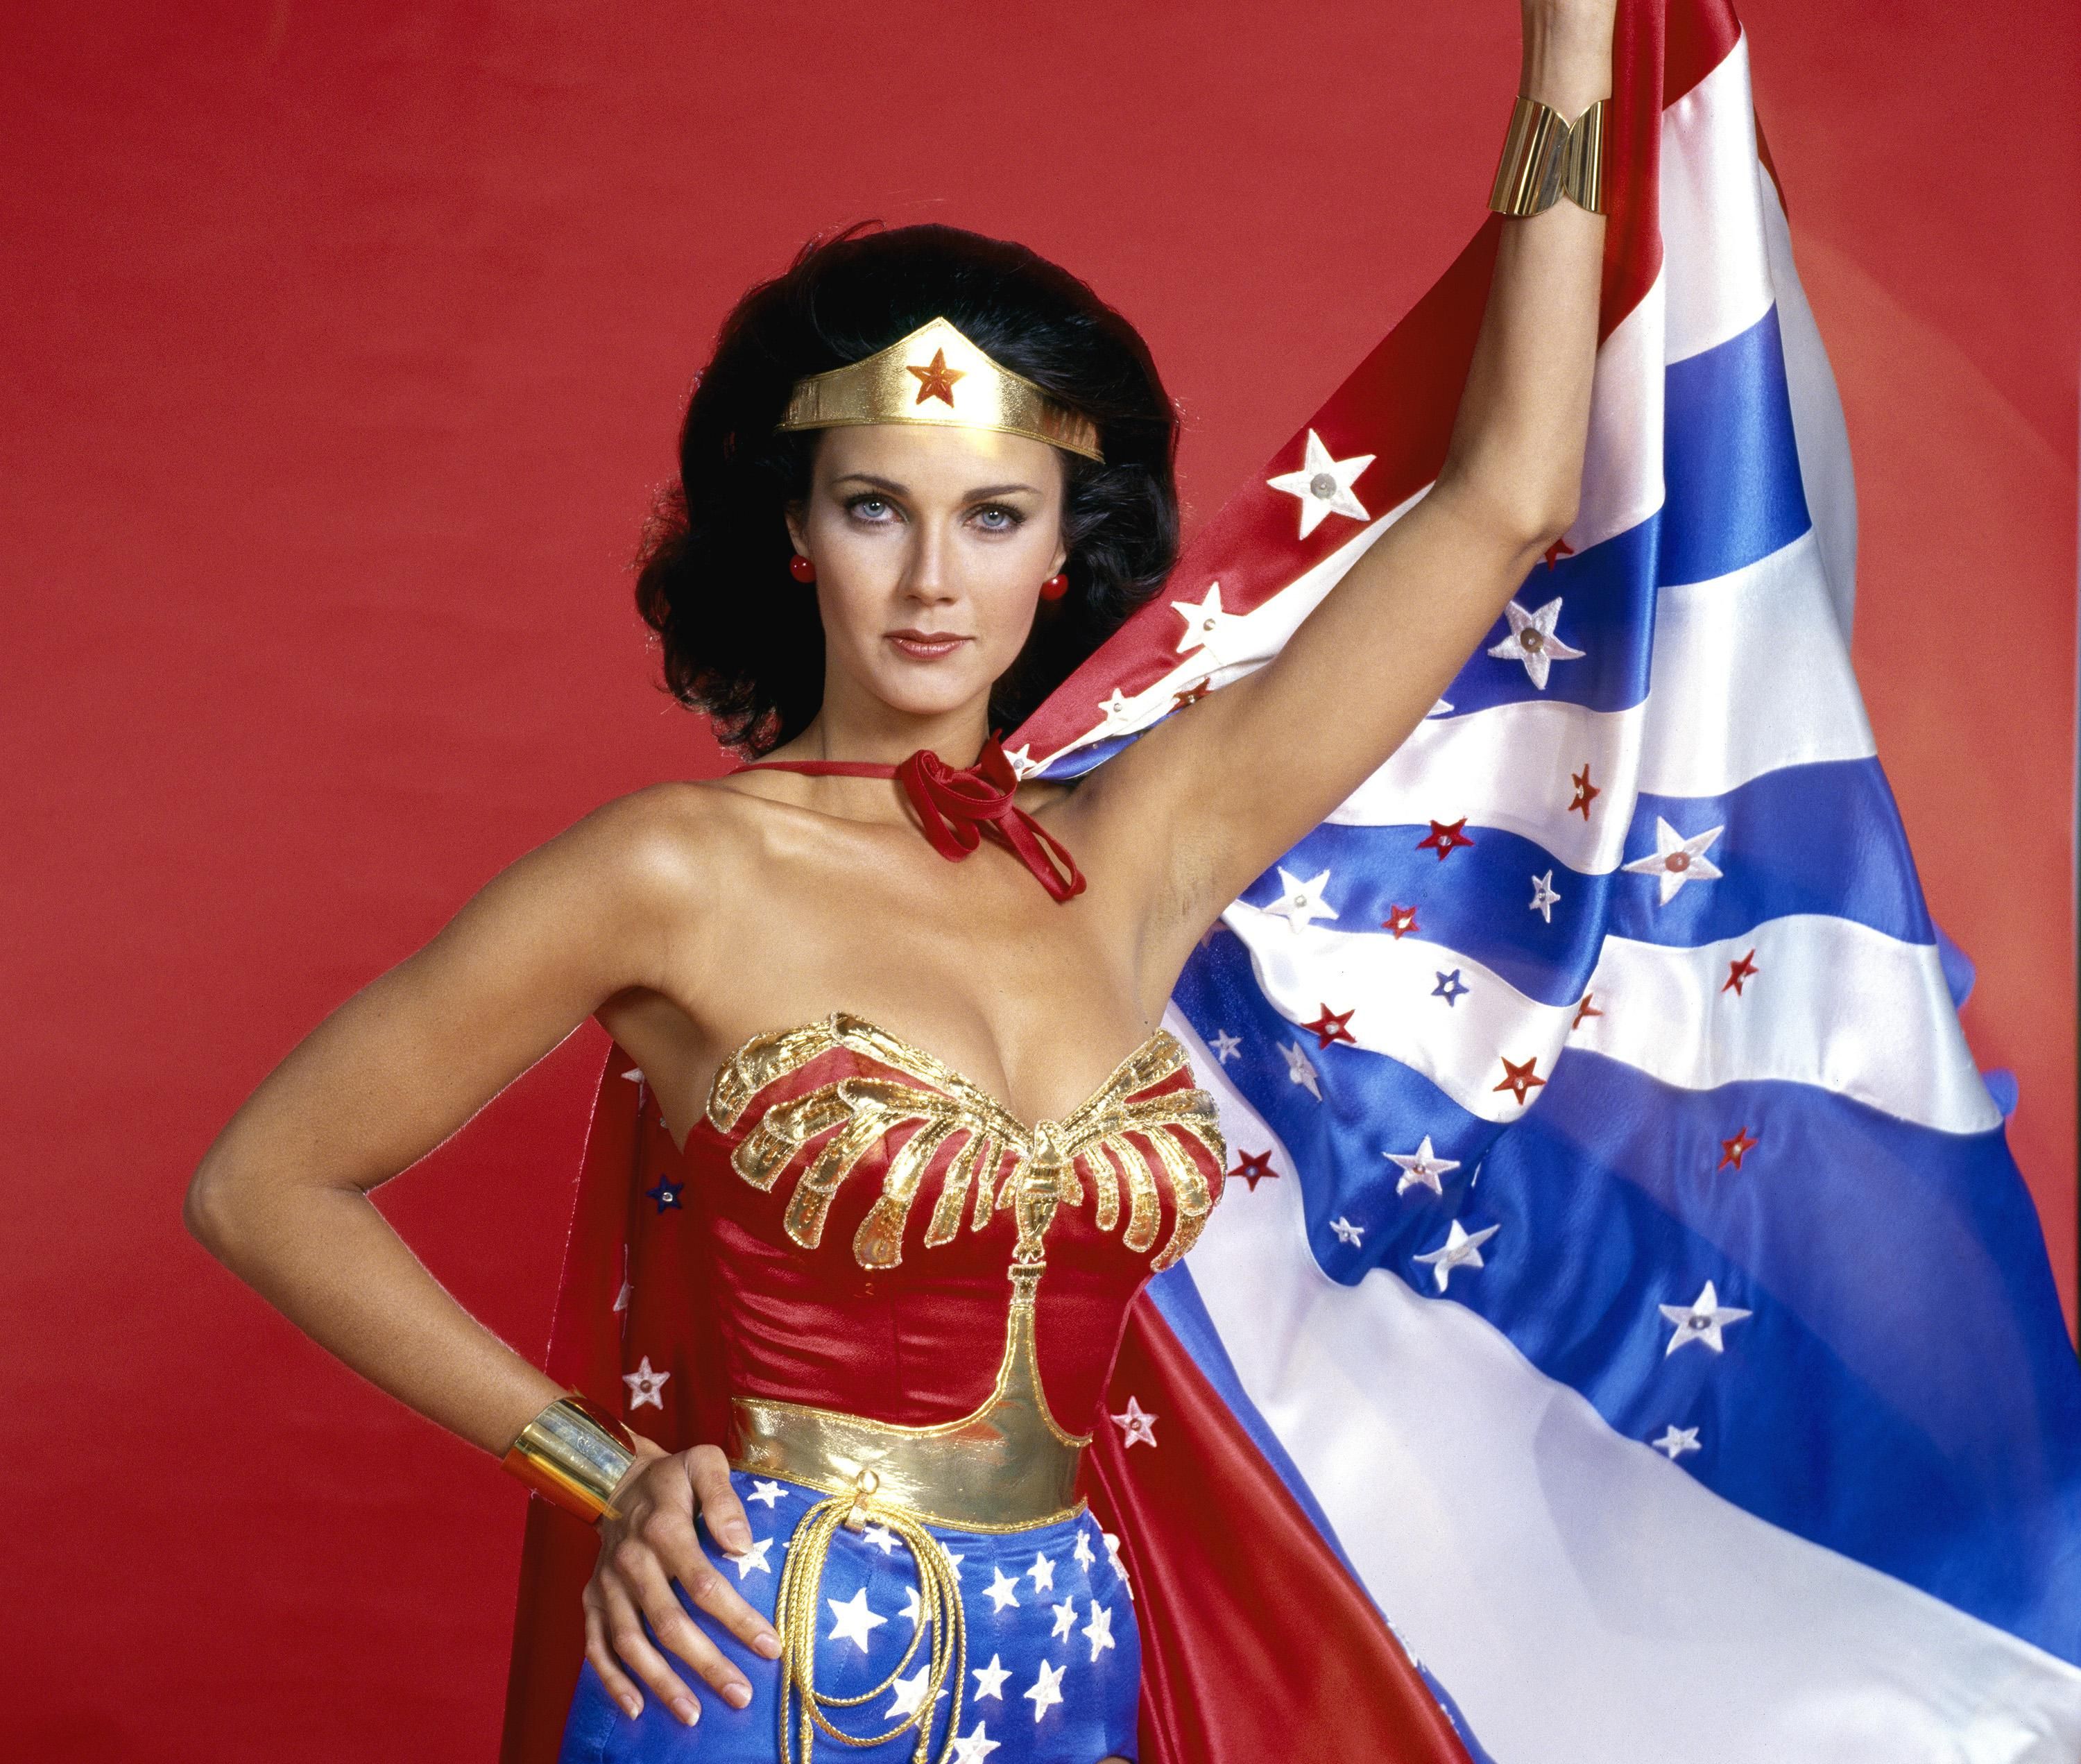 Actress Lynda Carter dressed as Wonder Woman in a star-spangled outfit with a golden crown and a blue and white cape that she holds up with her left hand